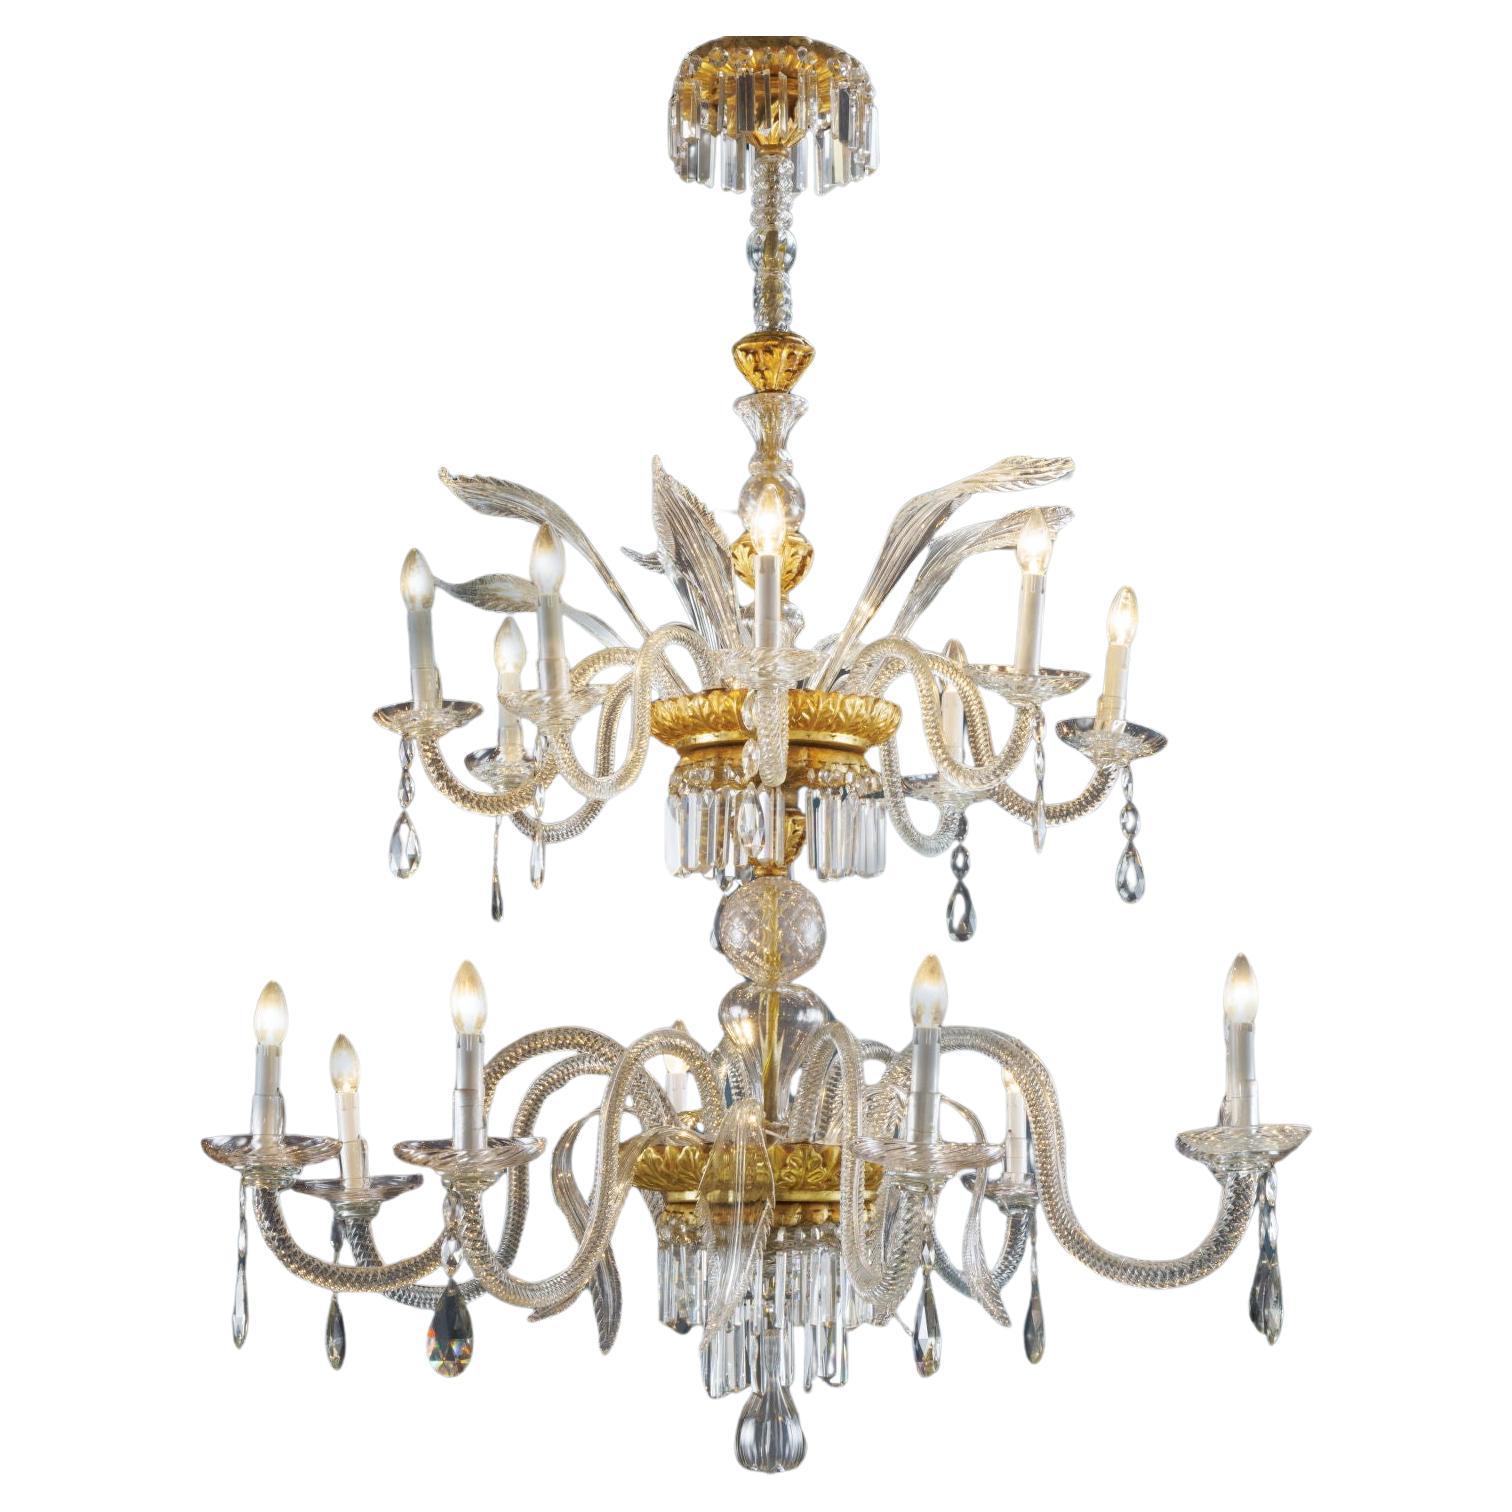 Gilded Wood and Crystal Chandelier. Florence, early 19th century